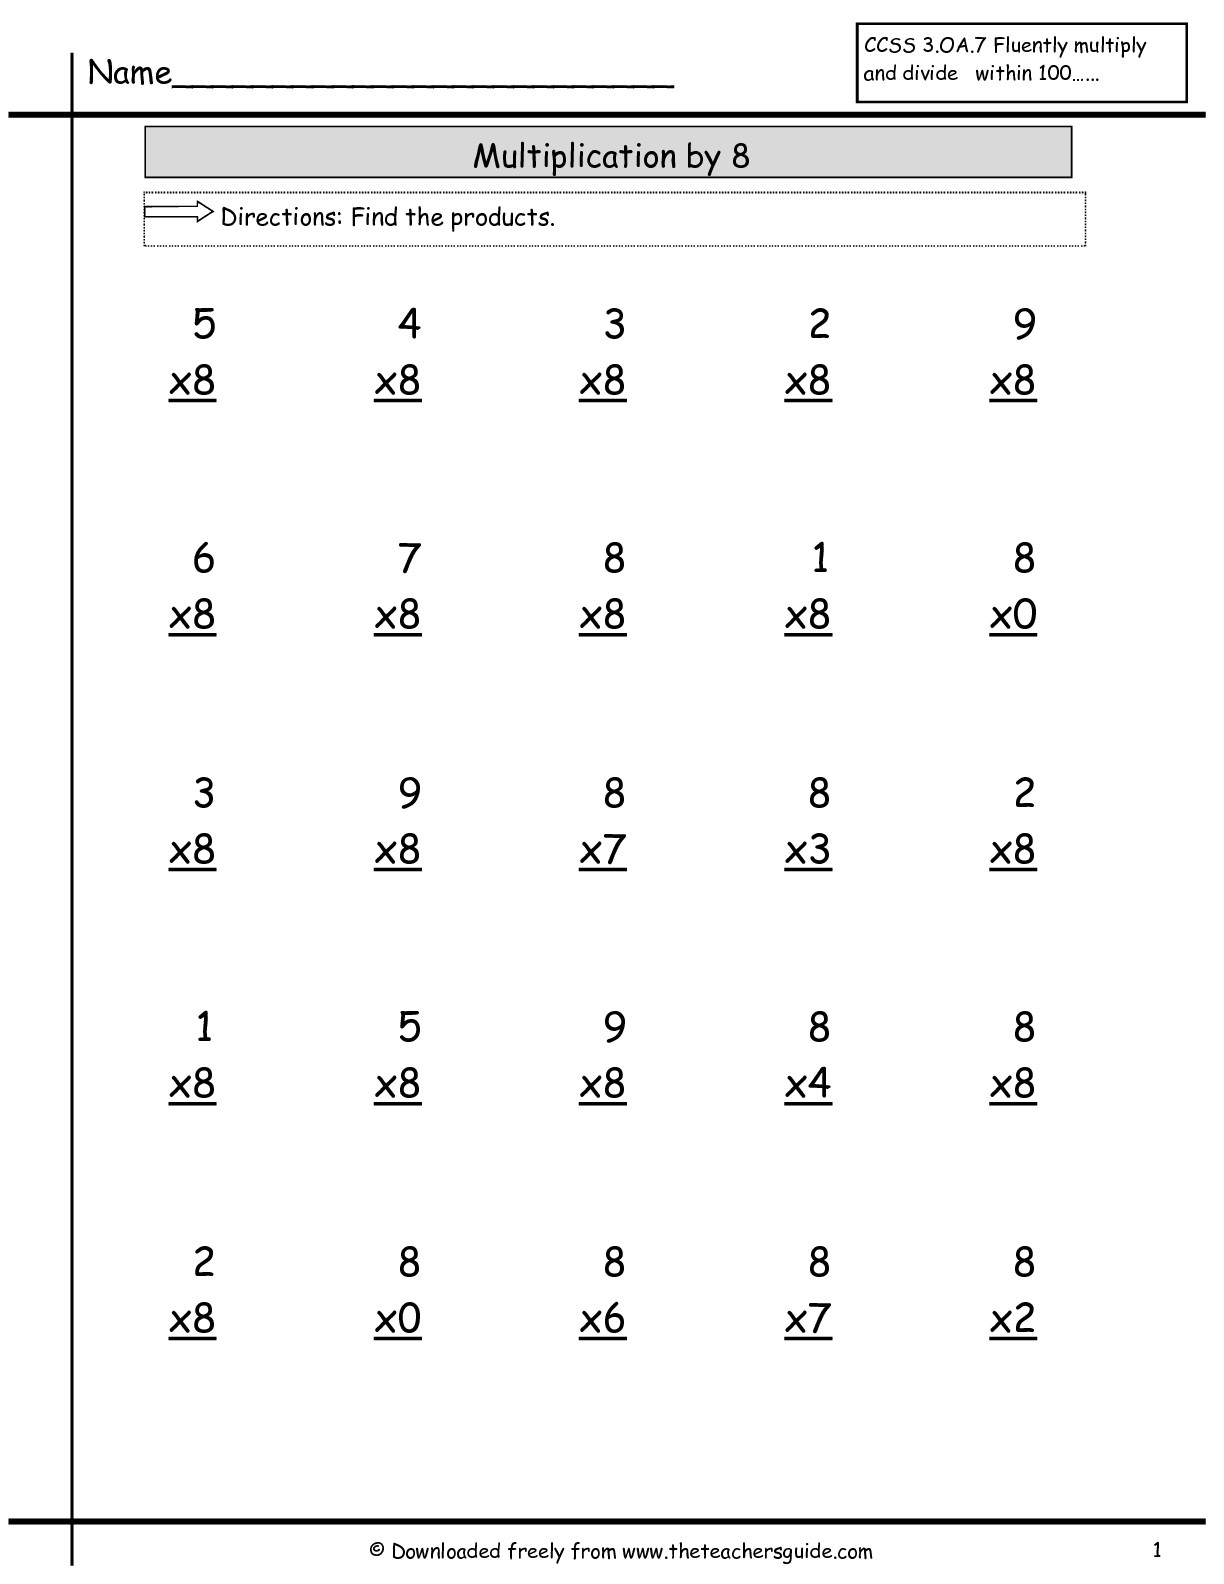 Multiplication Facts Worksheets From The Teacher&amp;#039;s Guide